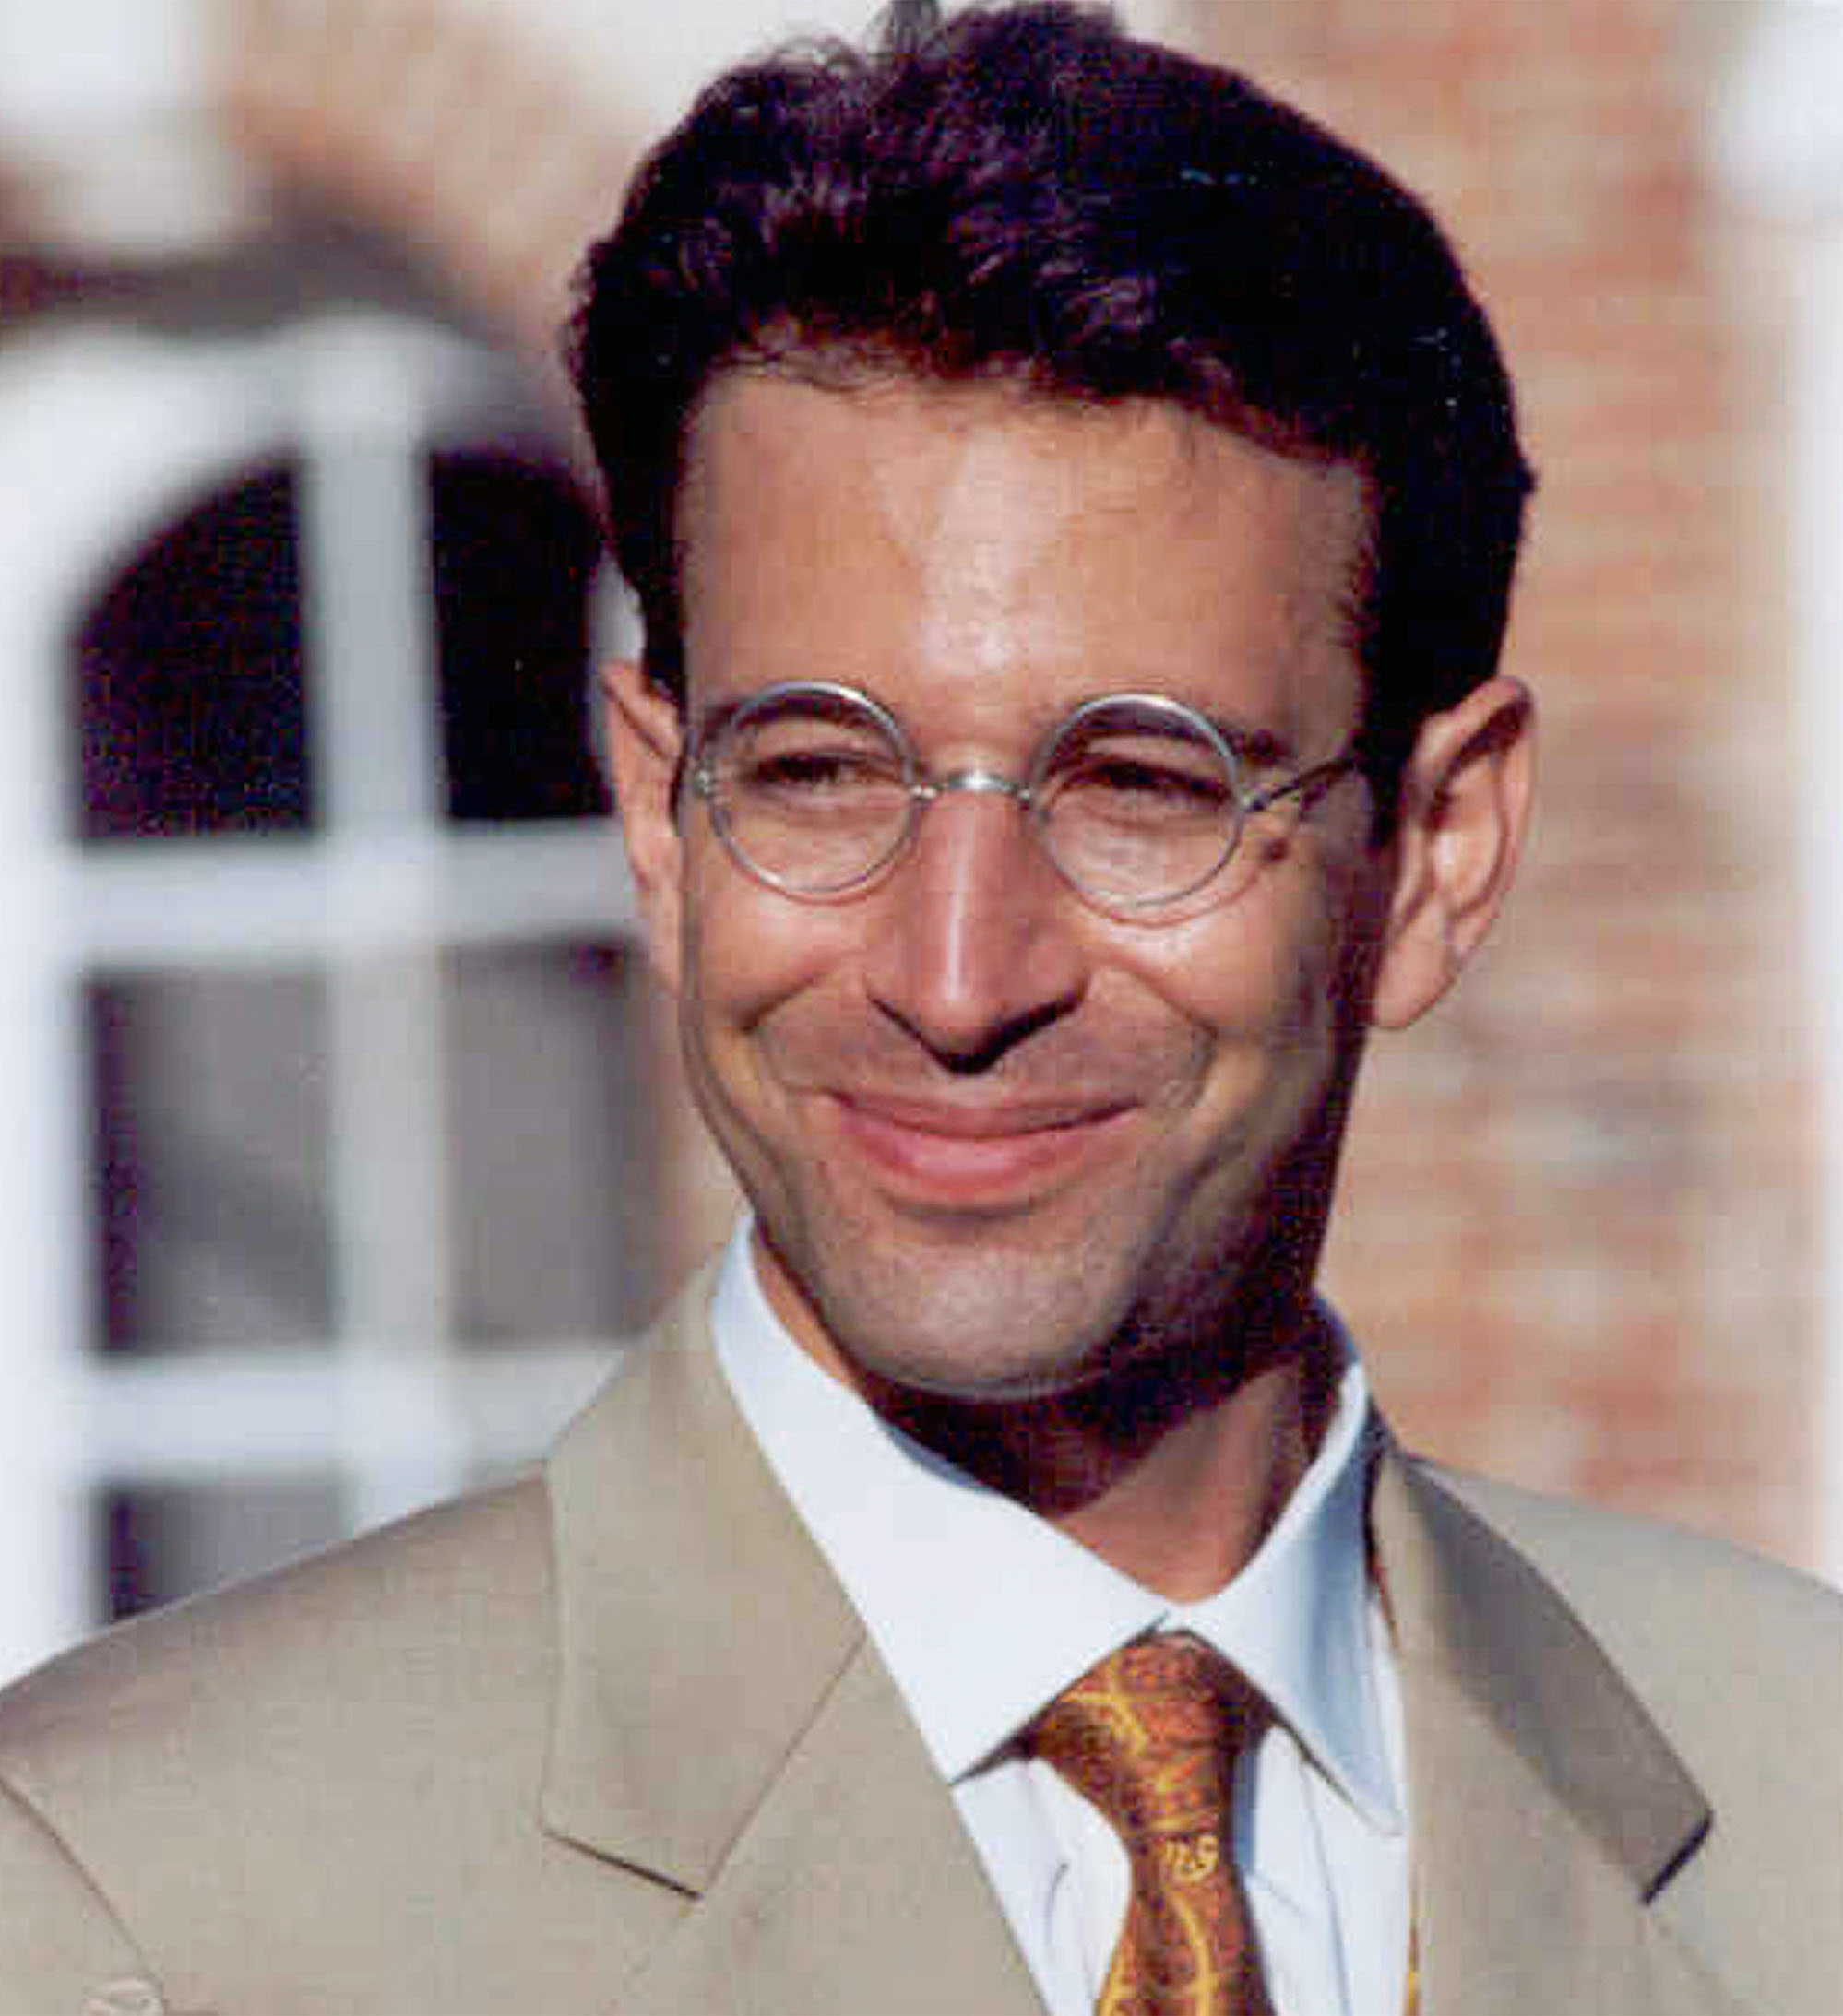 This undated photo shows Daniel Pearl, a Wall Street Journal reporter kidnapped by Islamic militants in Karachi, Pakistan. (Getty Images)